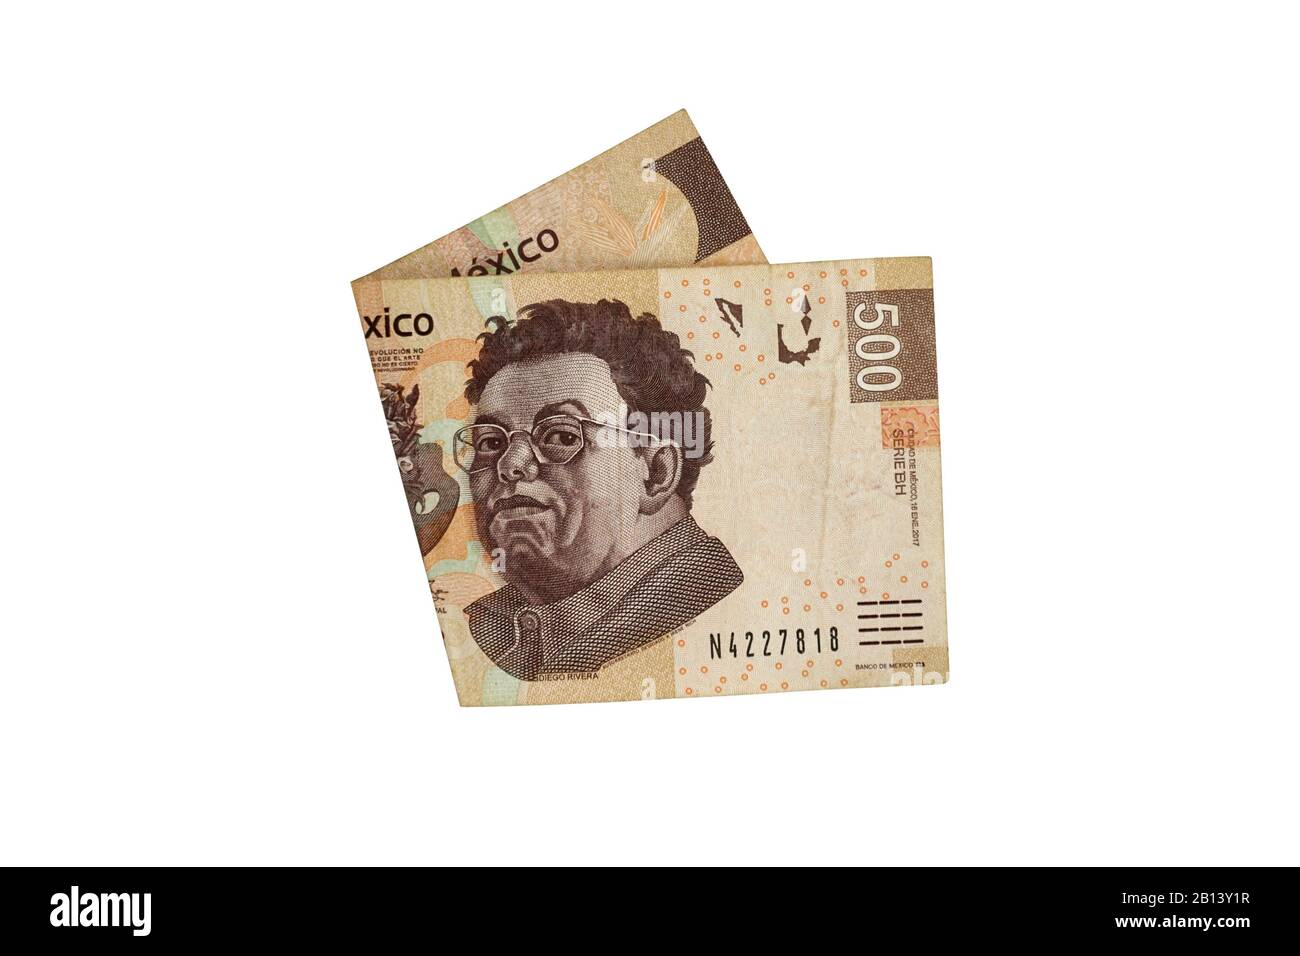 Peso Note High Resolution Stock Photography and Images - Alamy